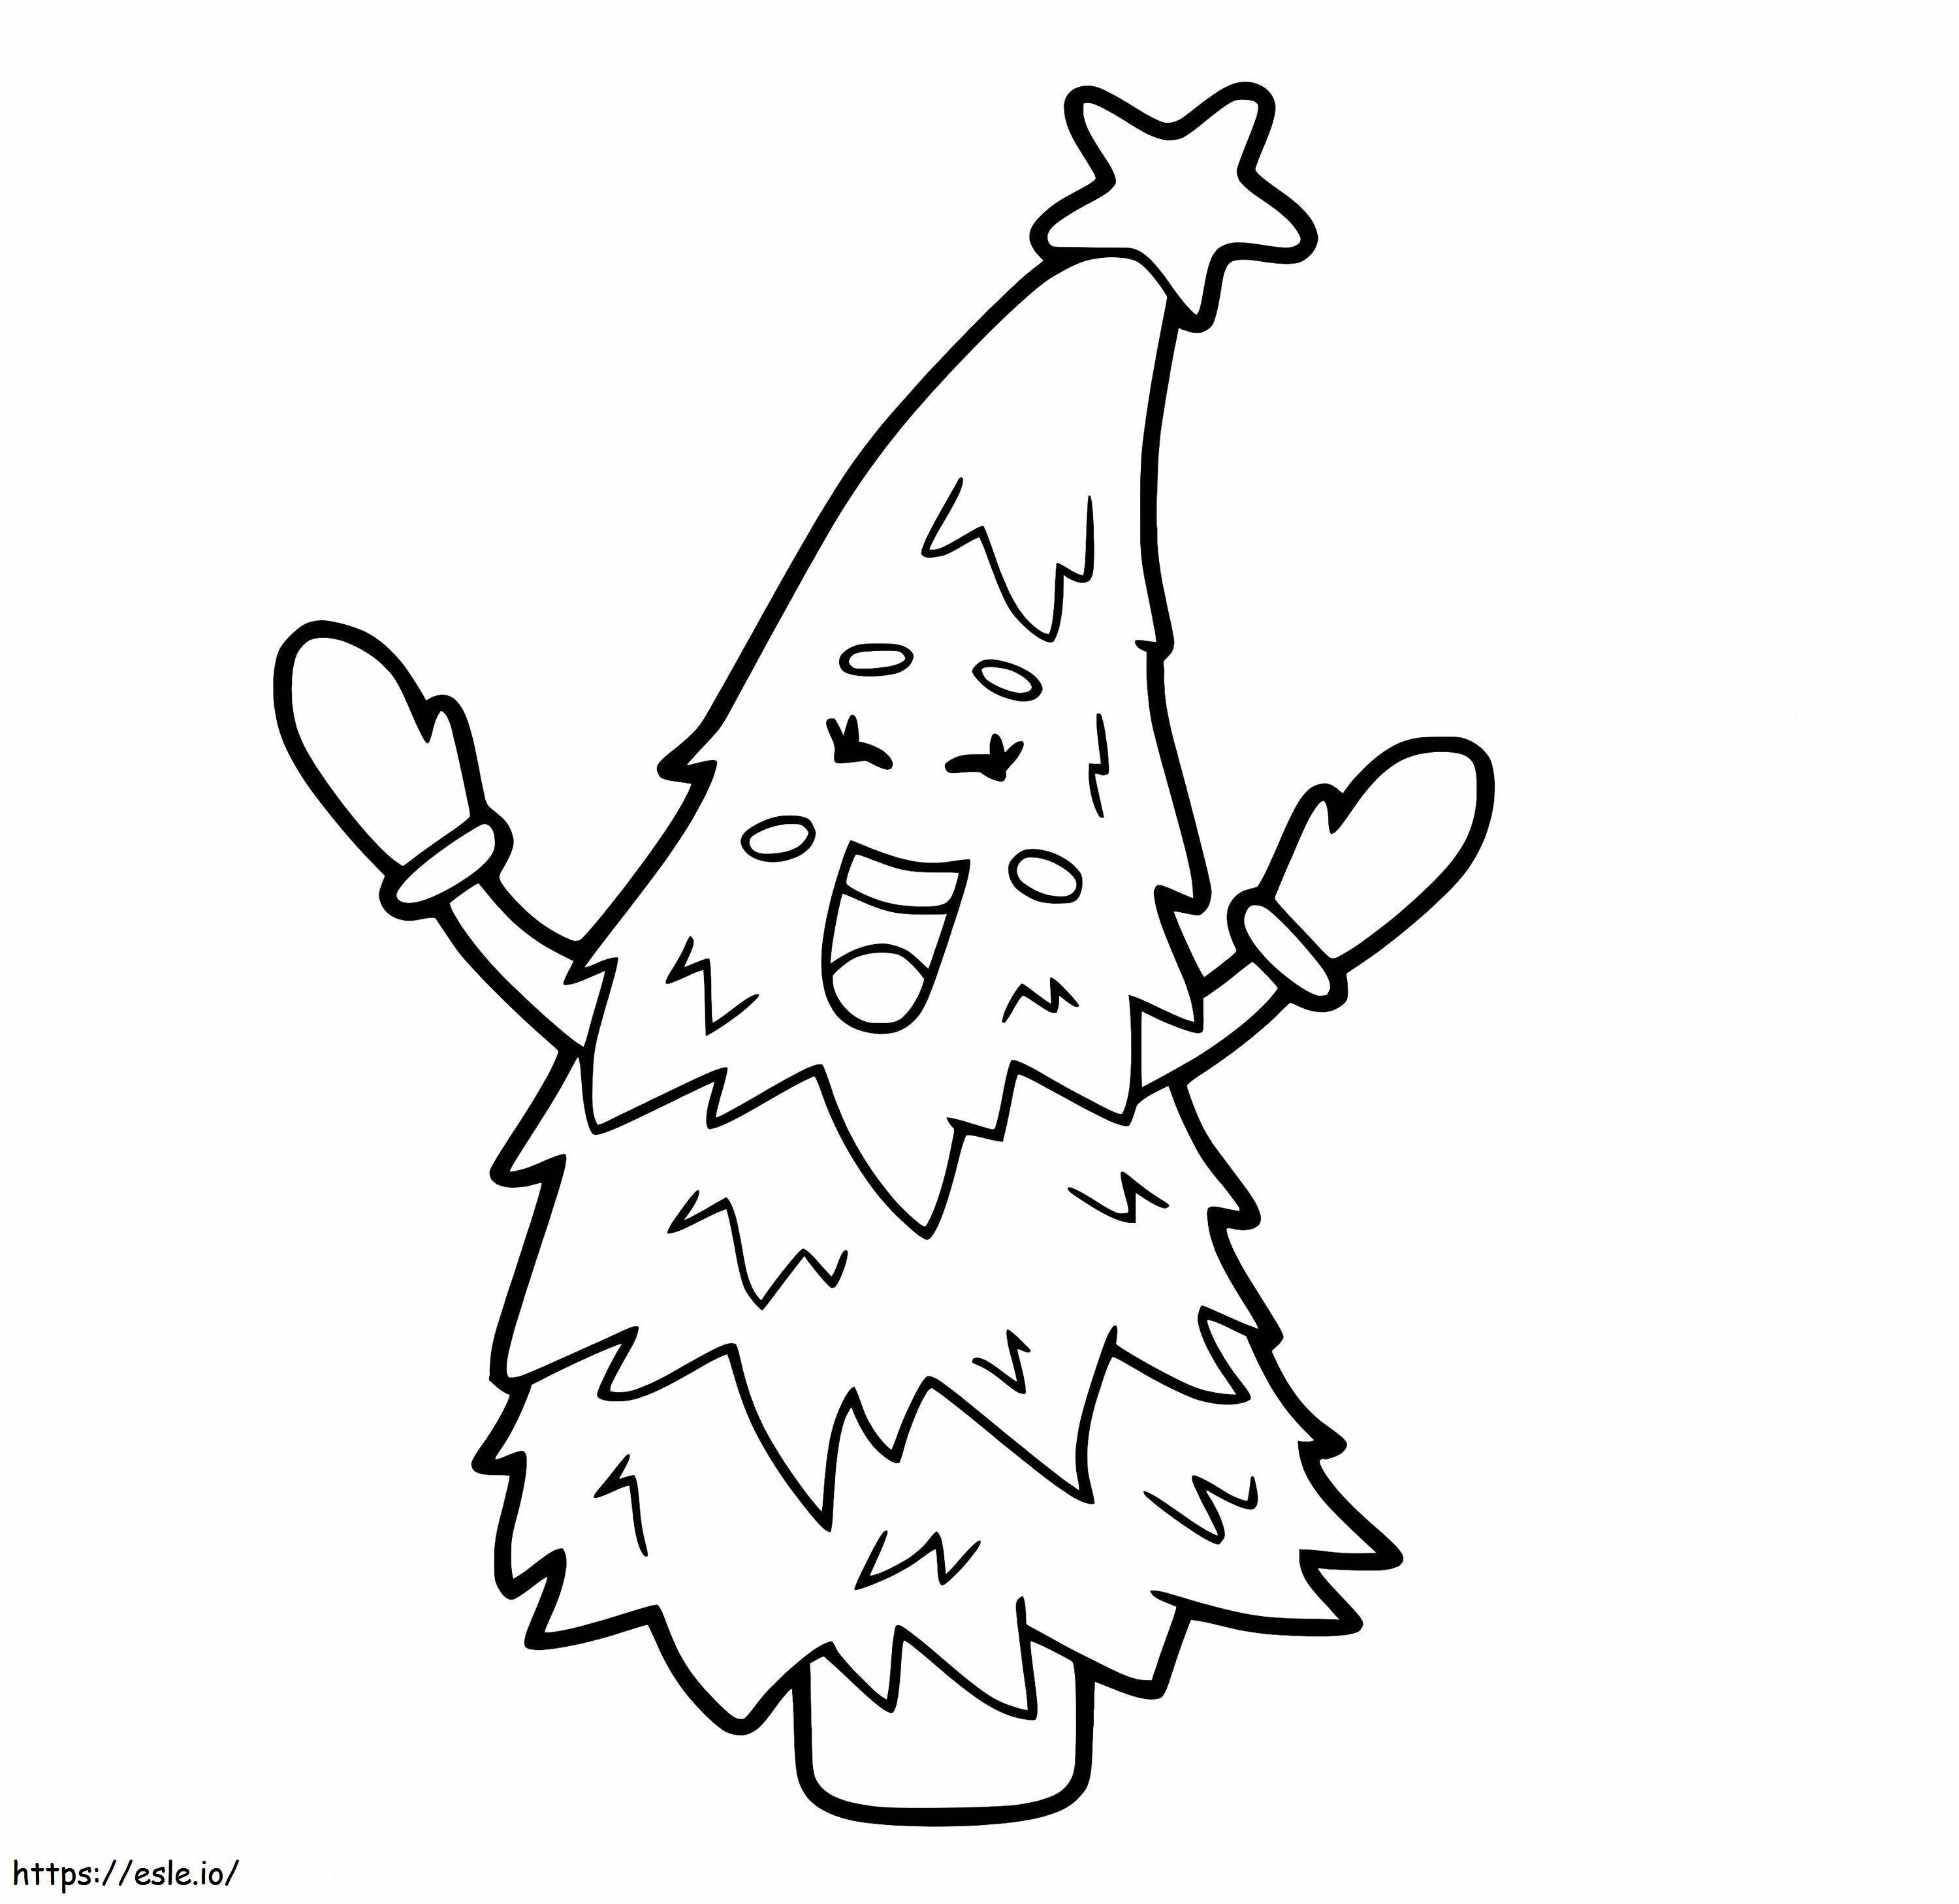 Happy Christmas Tree coloring page